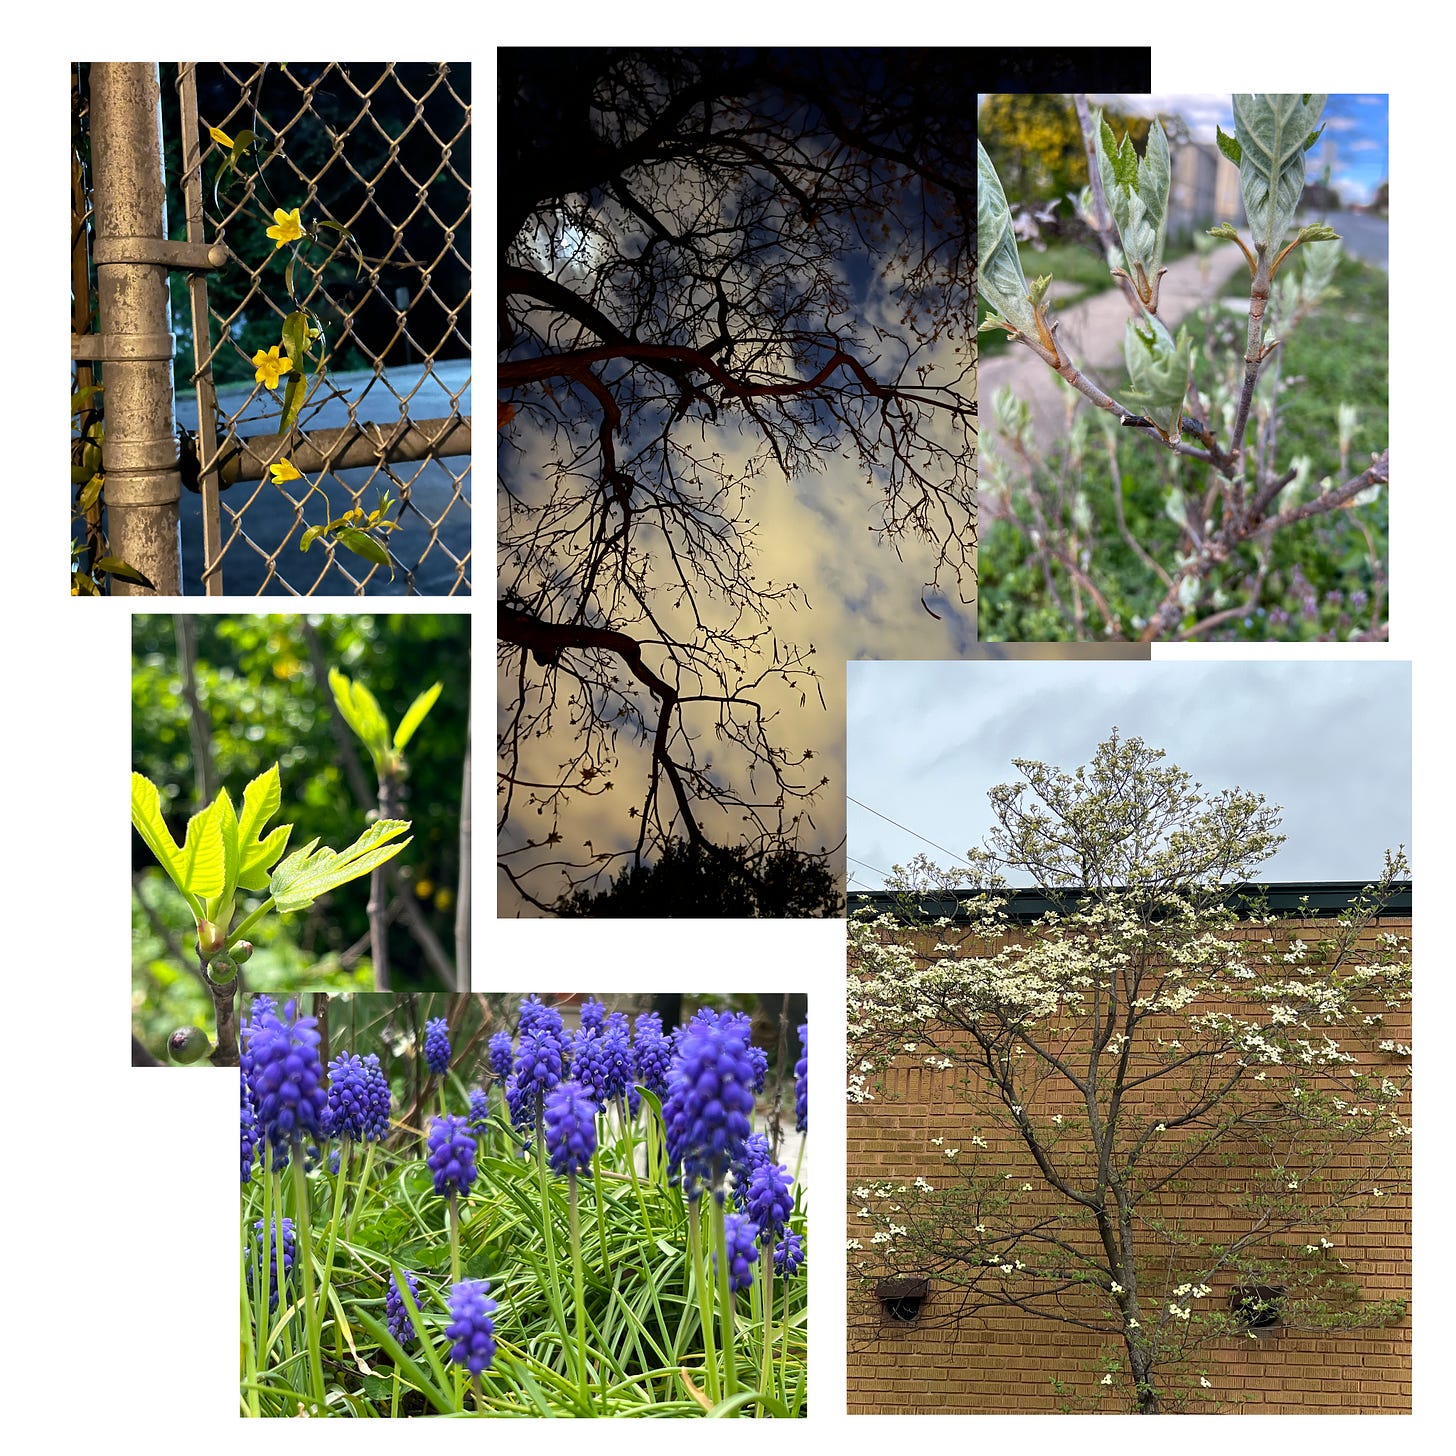 Images of plants, new growth, yellow flowers on a chain fence, a tree against the night sky, purple flowers